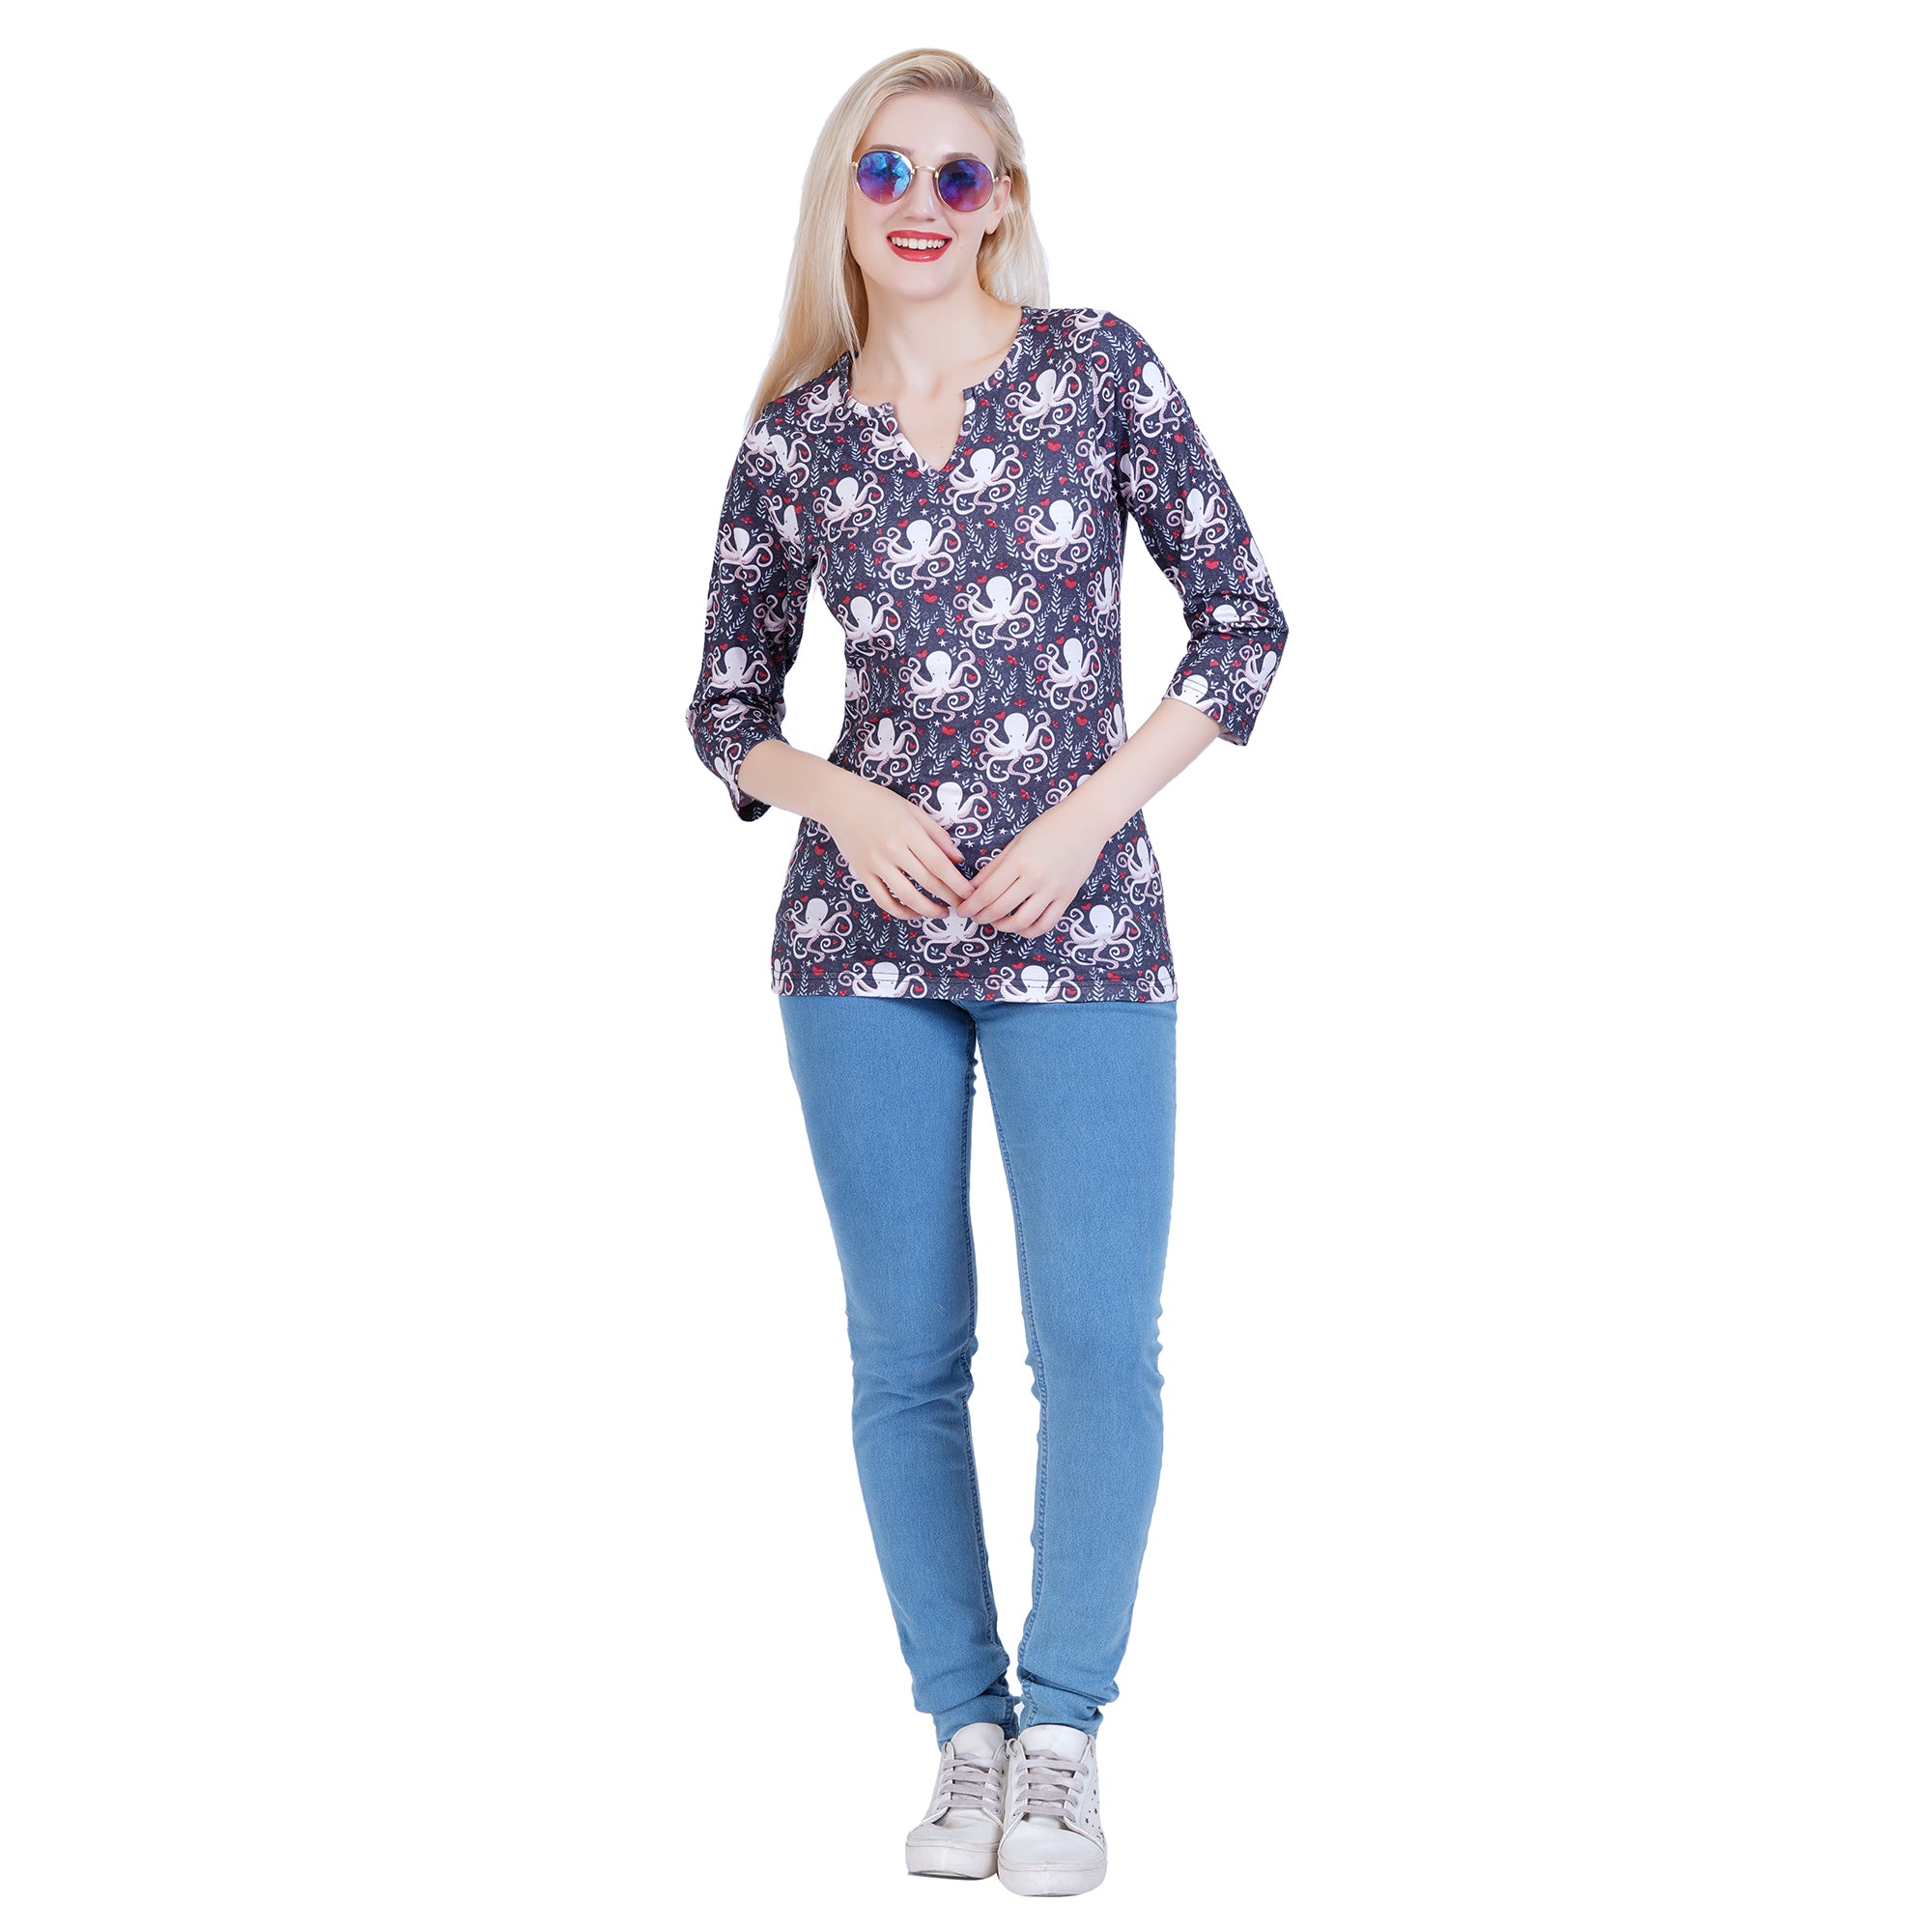 (Pre-order) Floral Octopus Maria Tunic Top